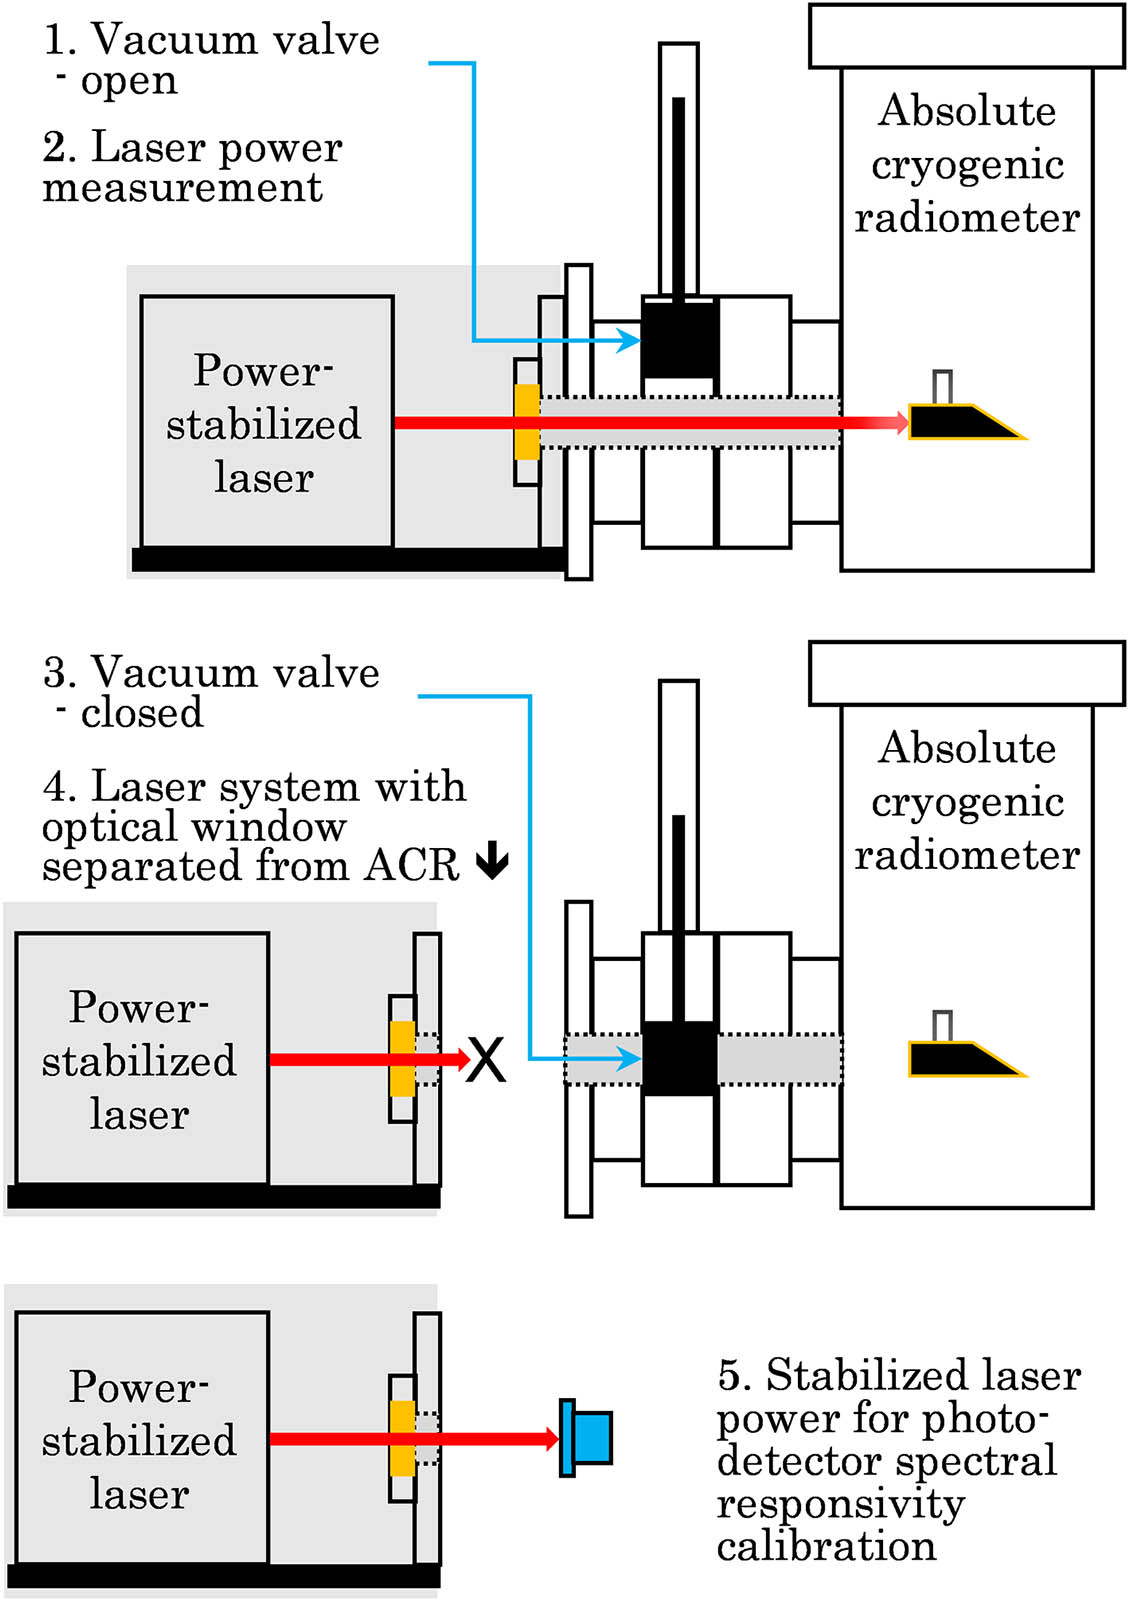 Optical radiant power measurement and photodetector spectral responsivity calibration scheme.